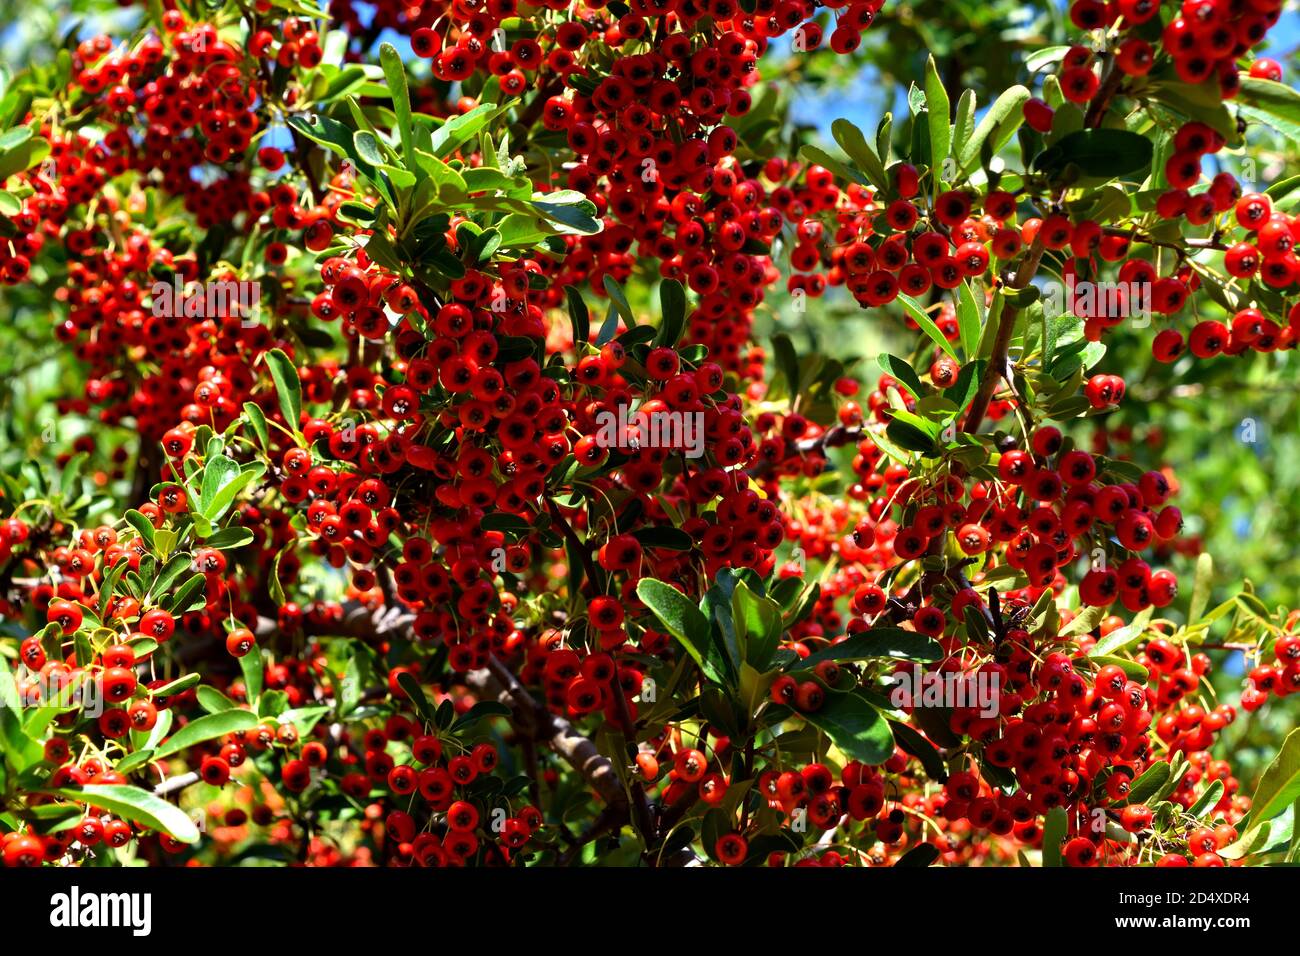 A Closeup of the splendid Cotoneaster plant with its red berries. Stock Photo